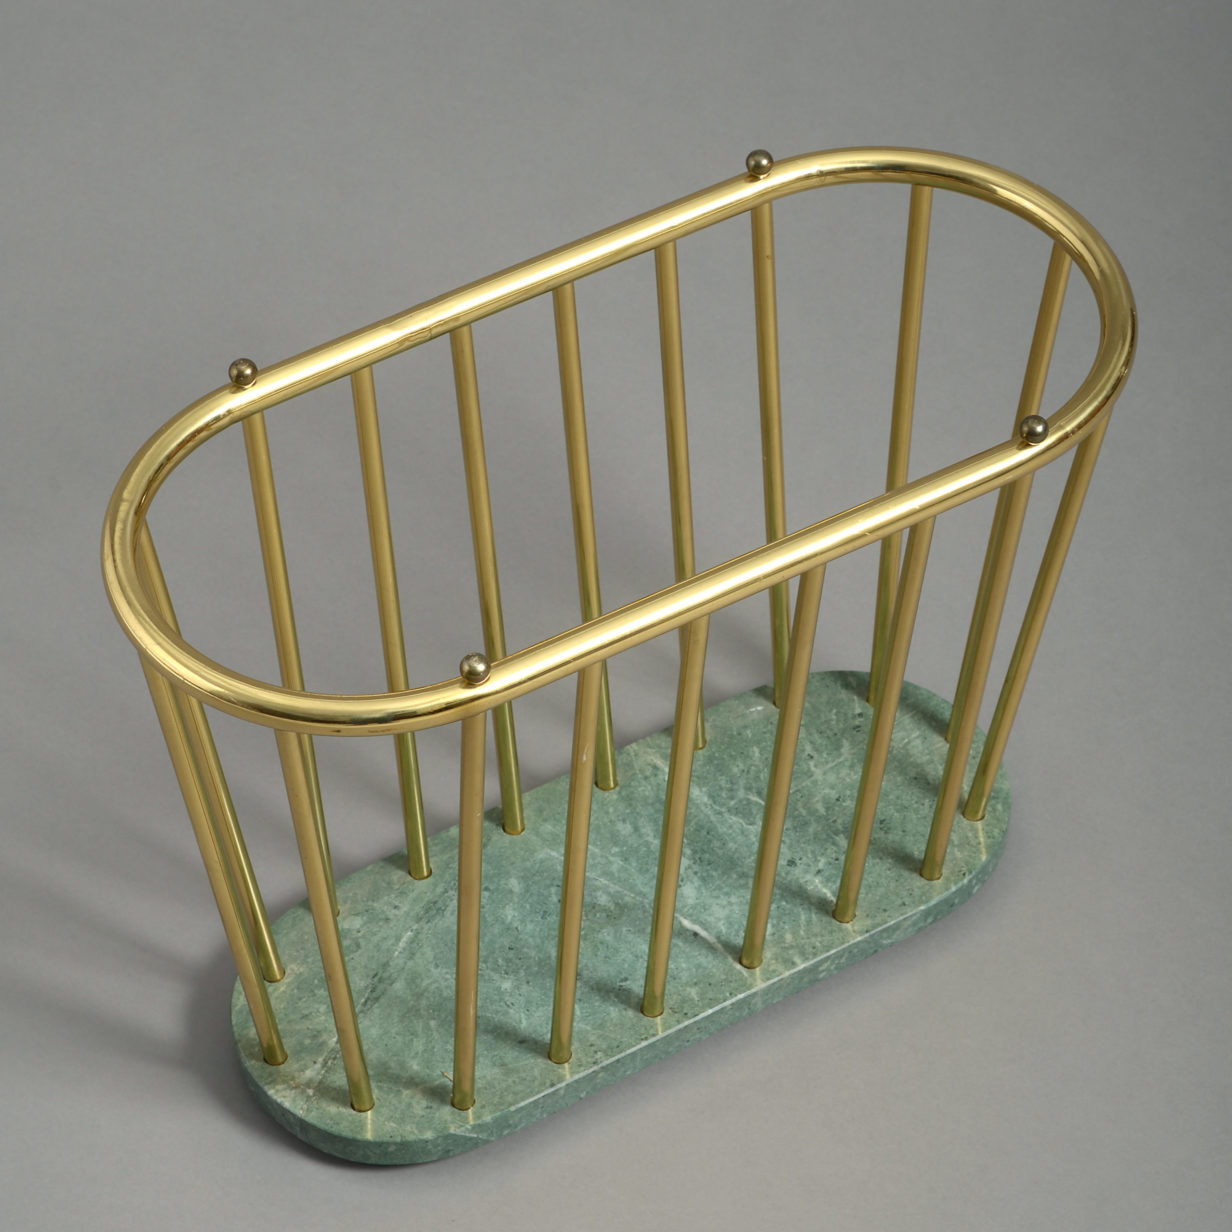 A mid-20th century brass and marble magazine rack